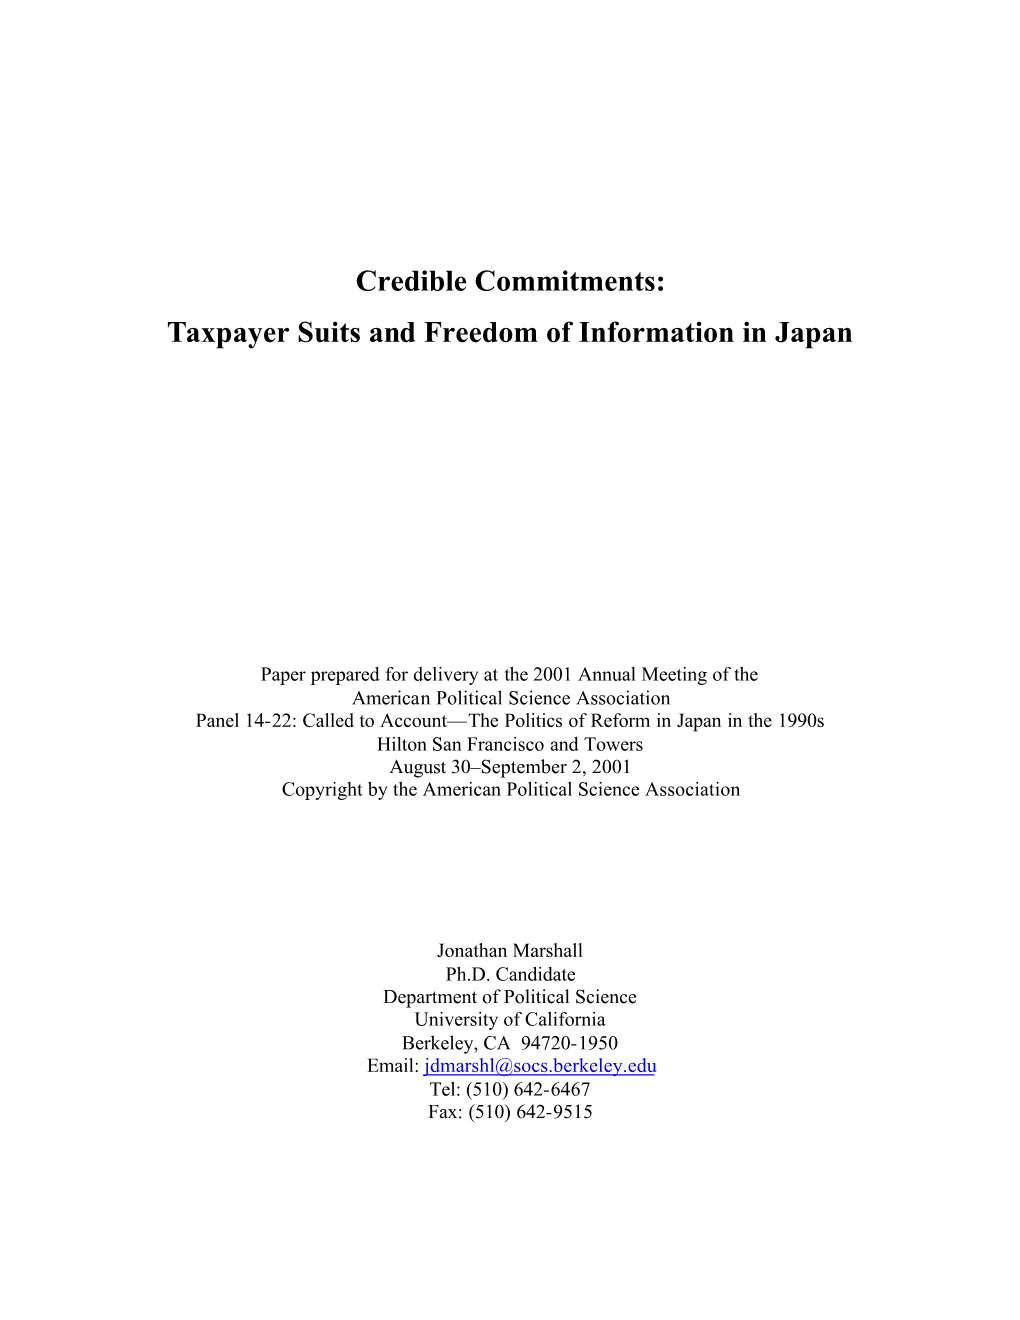 Taxpayer Suits and Freedom of Information in Japan